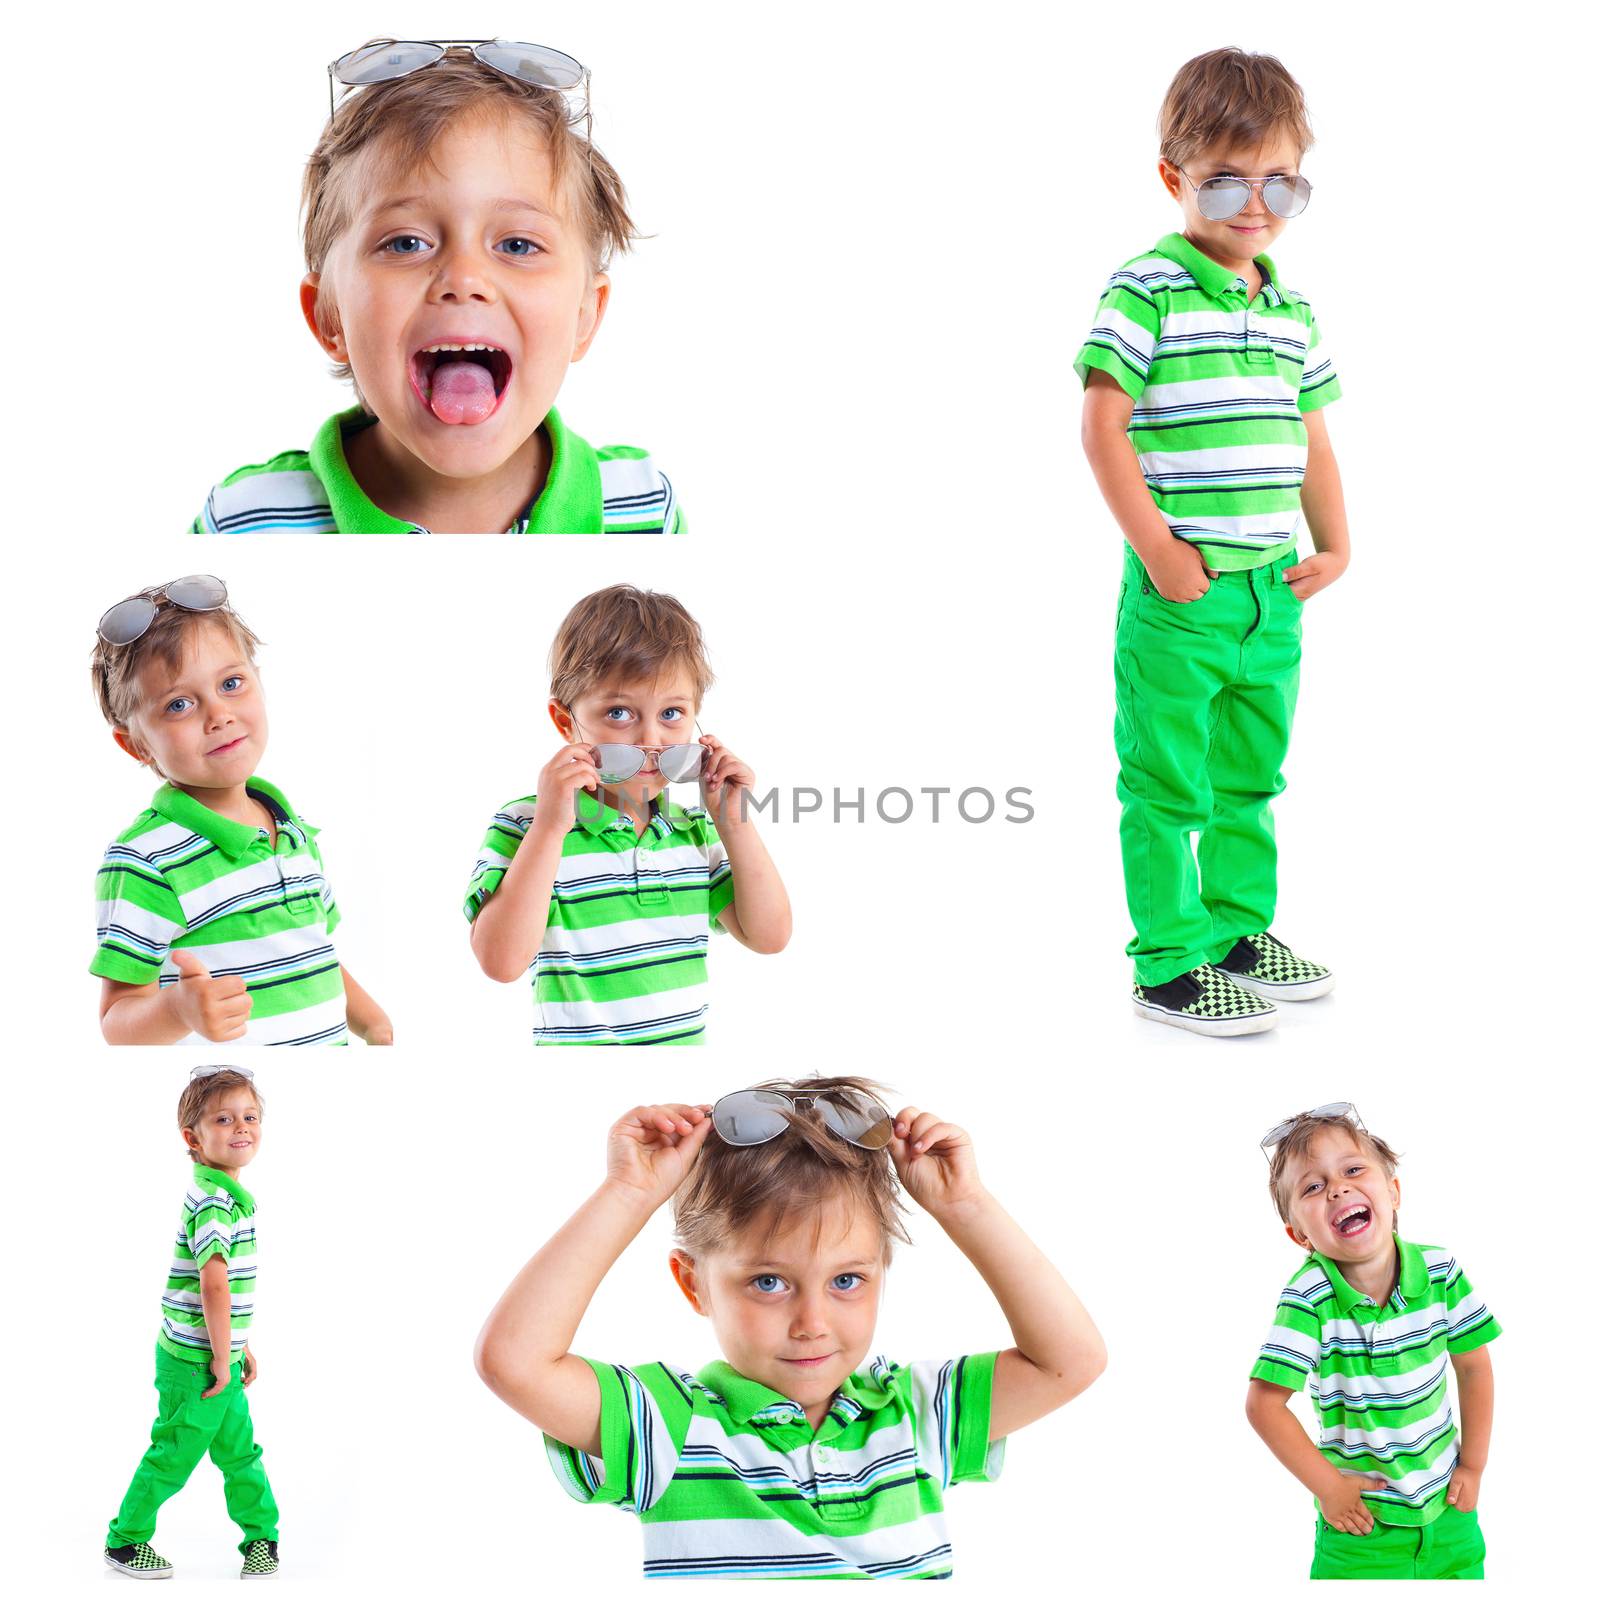 Collage of images of a boy with sunglasses and wearing green clothing. Isolated on white background